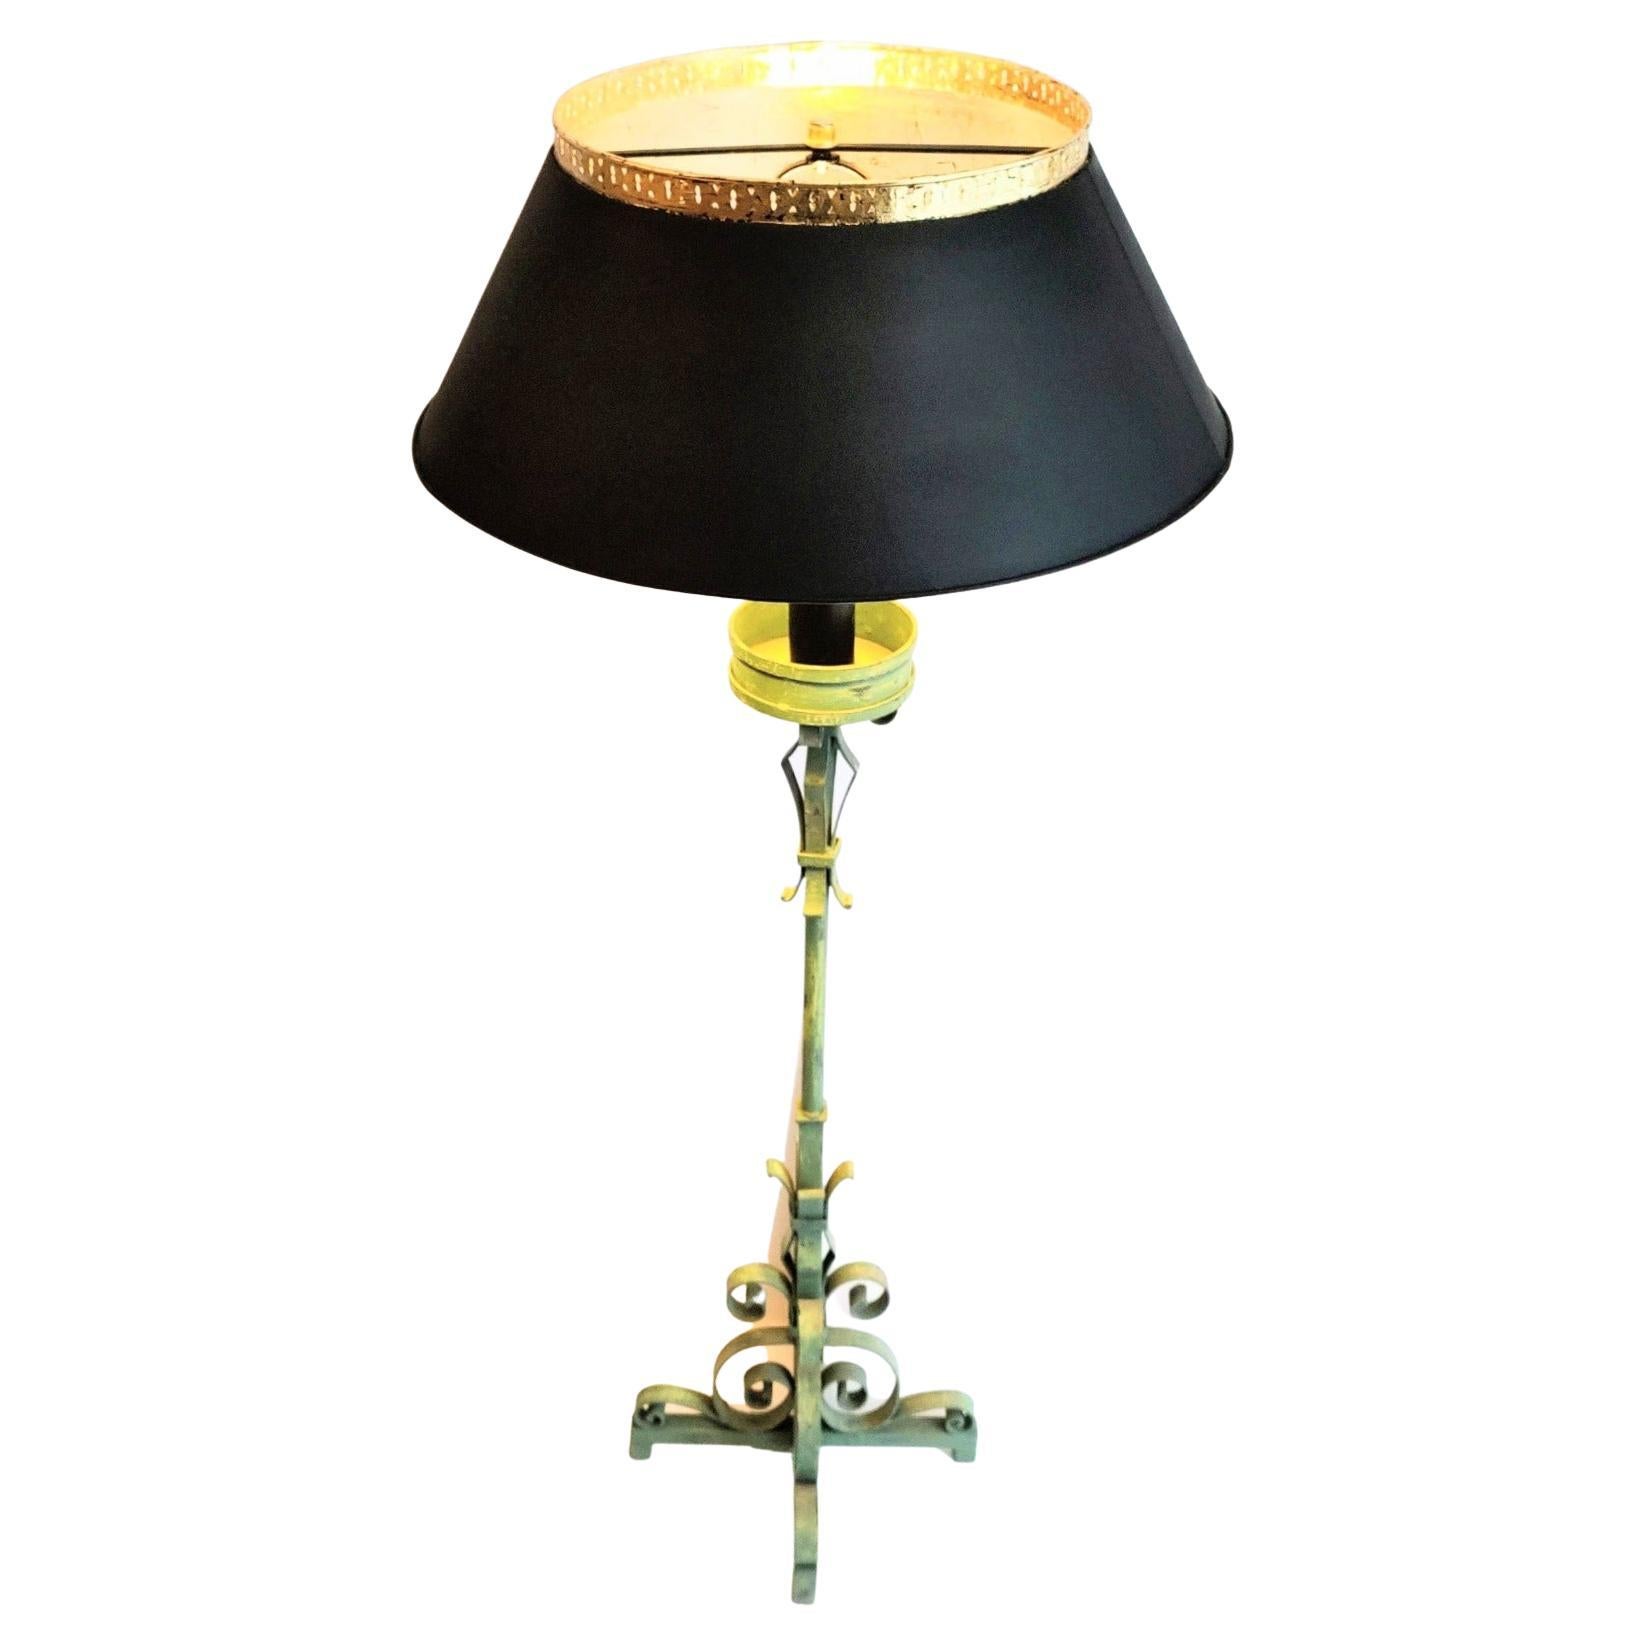 Original and Elegant Wrought Iron Lamp from the 1950s. in Green, Black and Gold. For Sale